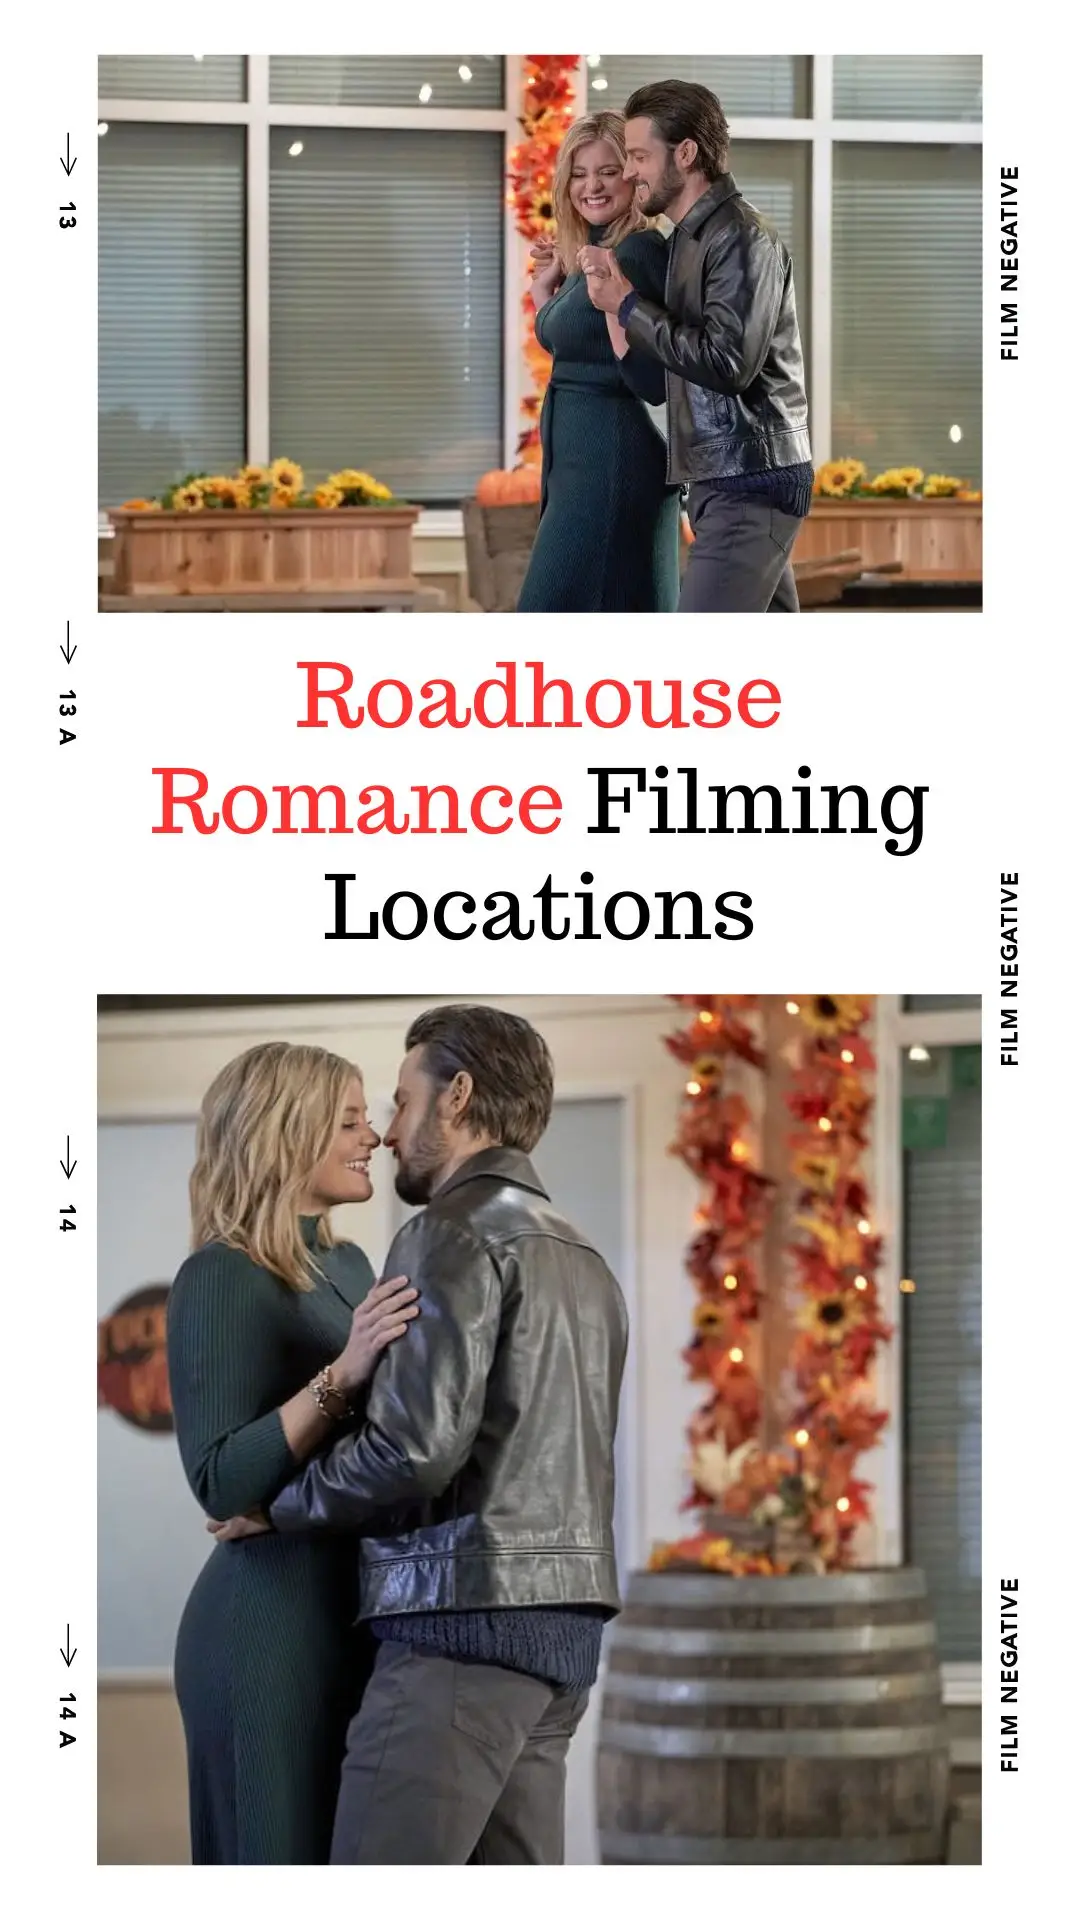 Roadhouse Romance Filming Locations